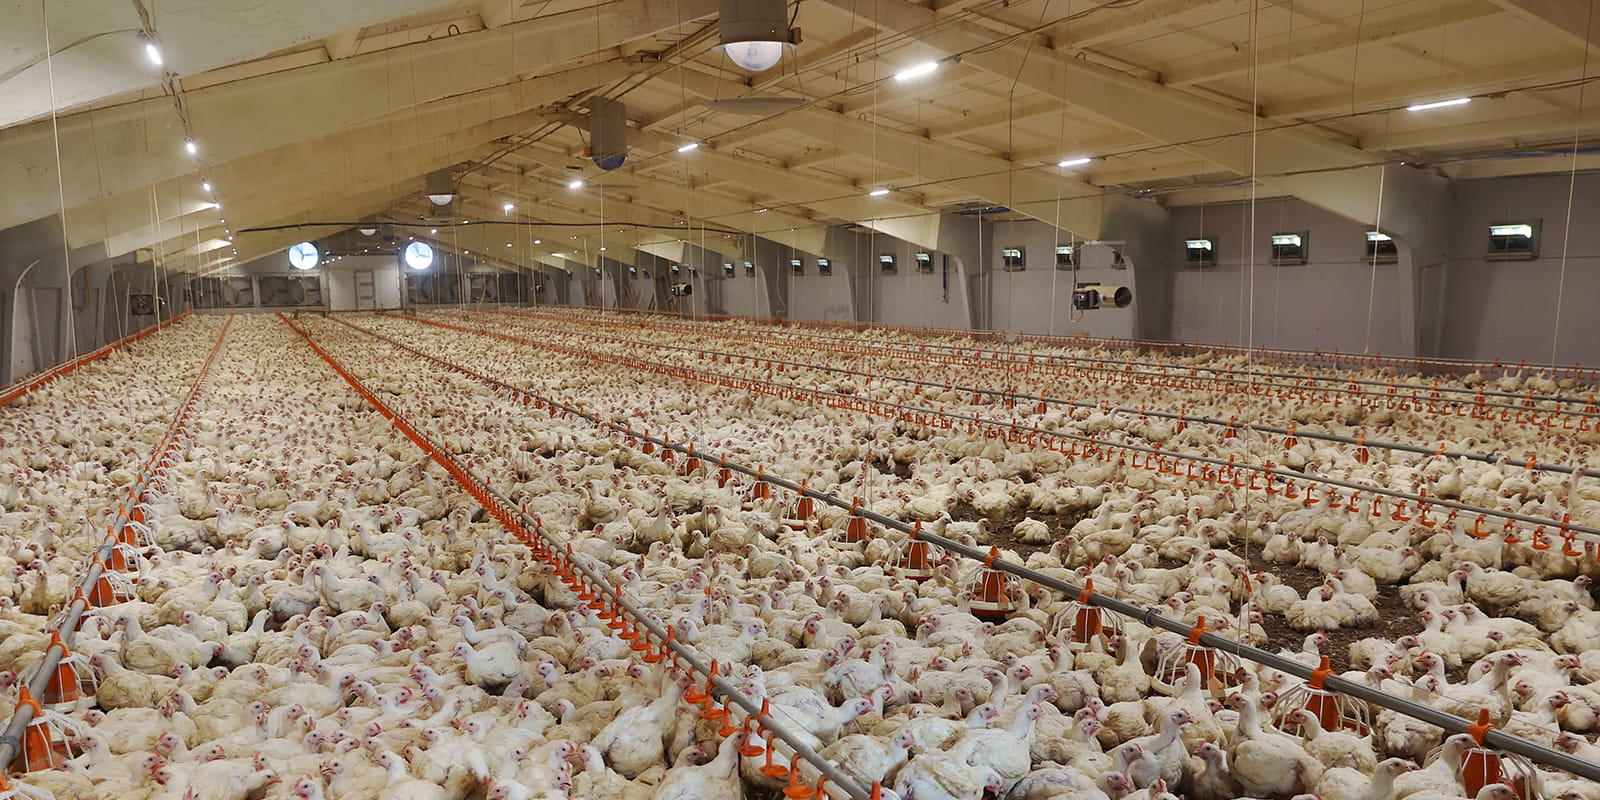 What Should You Focus on When Lighting in a Poultry